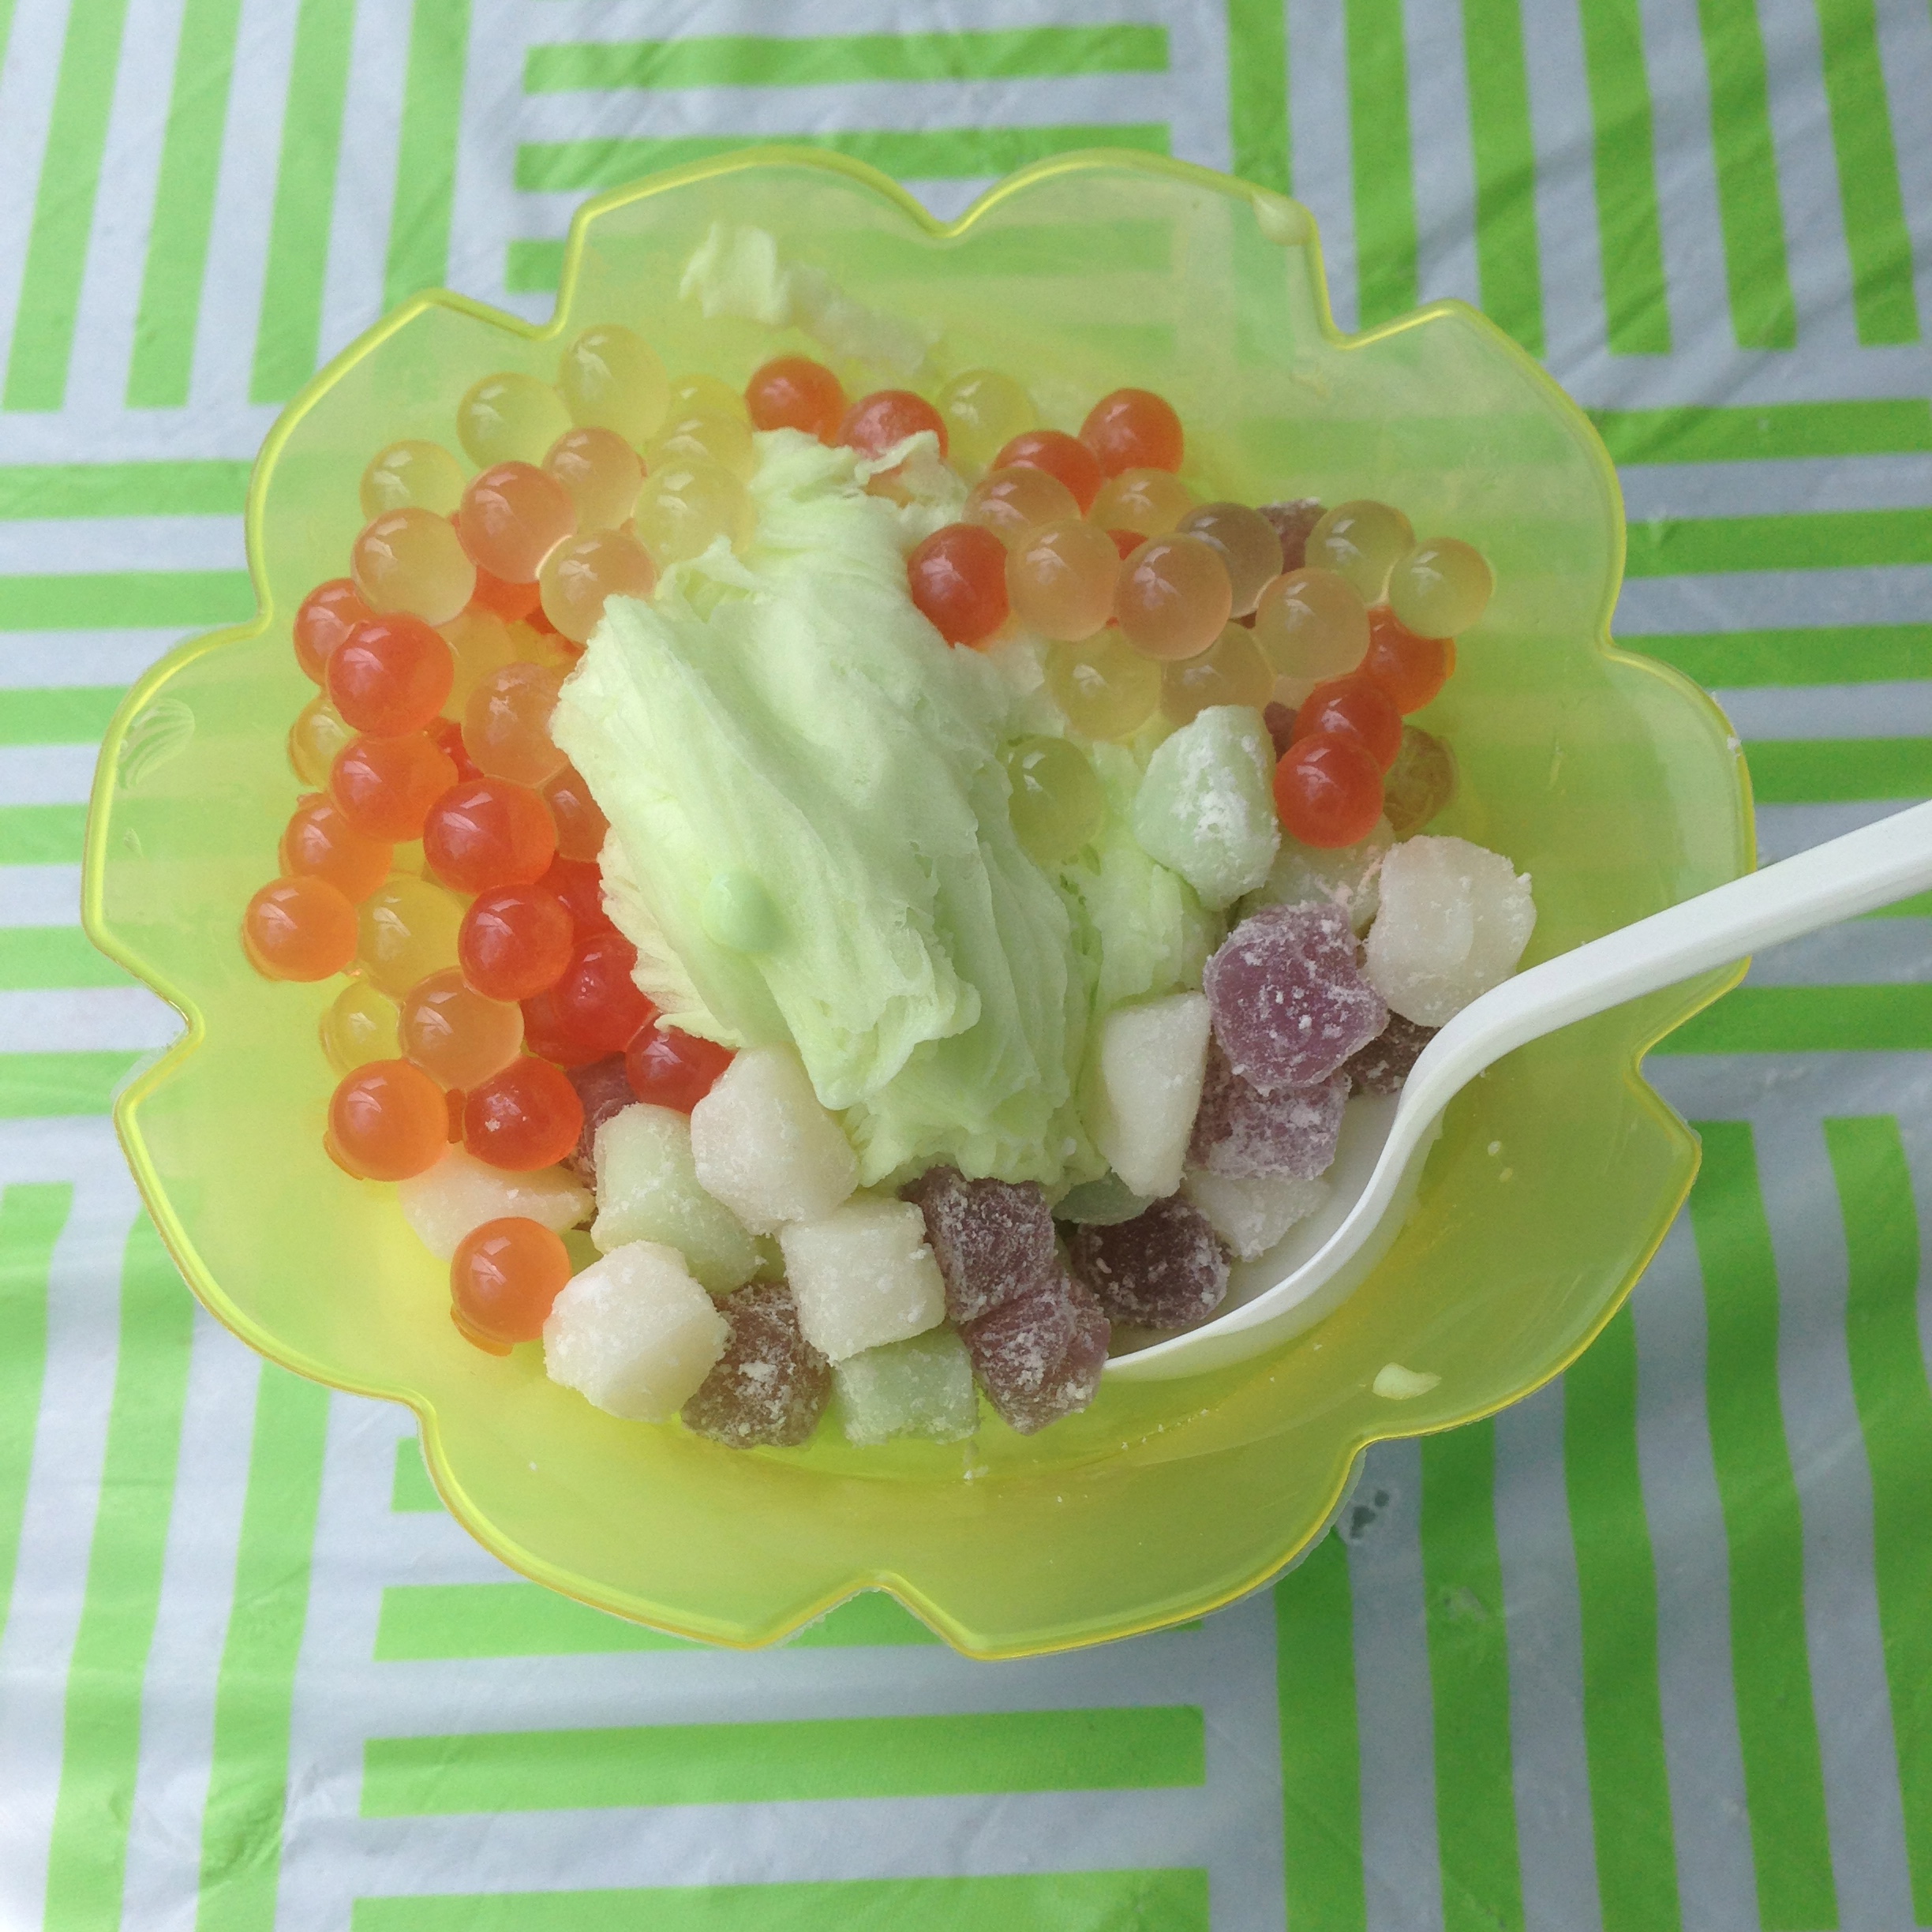 Melon flavoured snow ice with all the fixings.